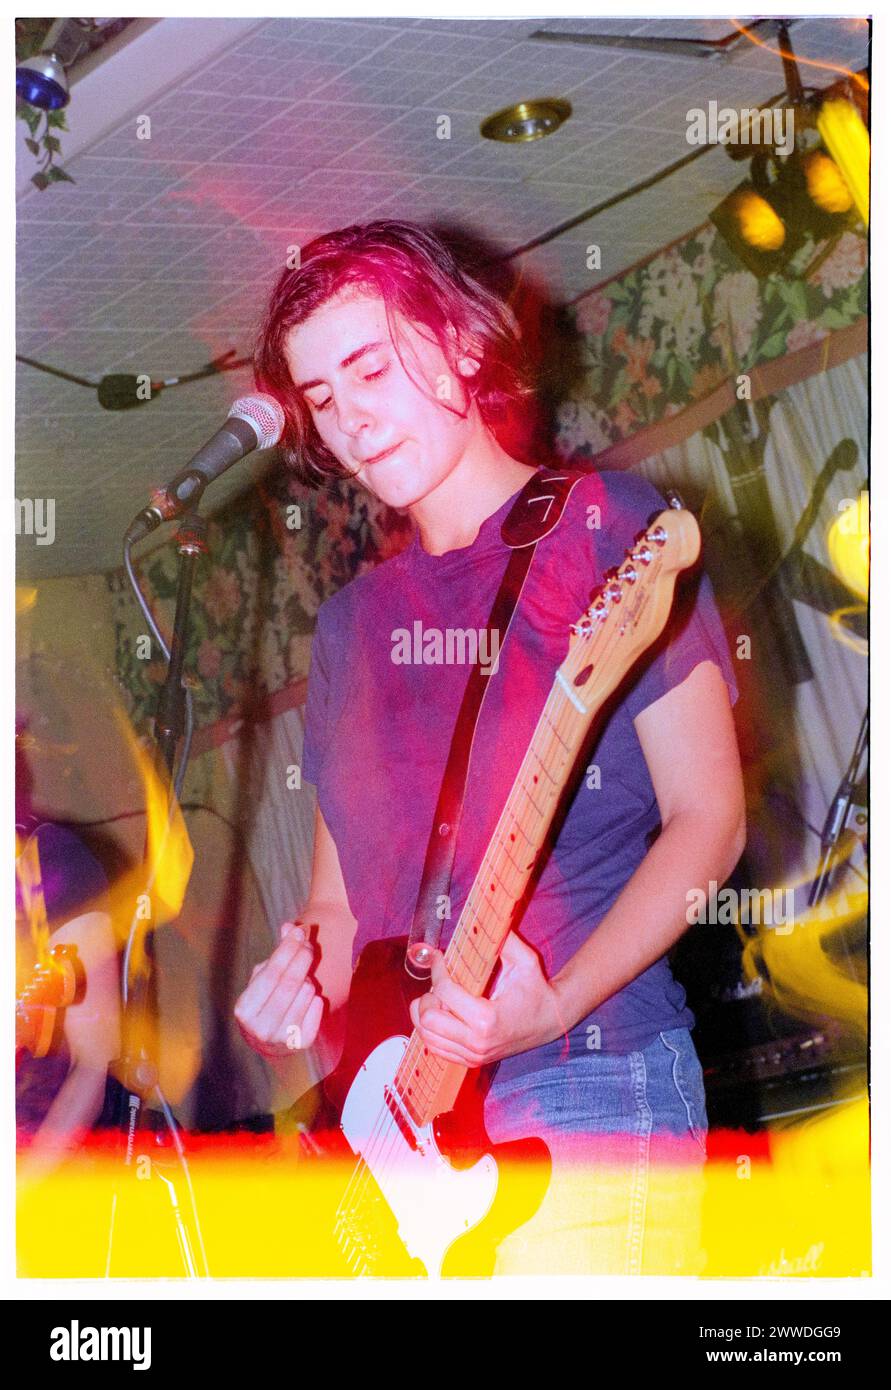 ELASTICA, YOUNG, EARLY GIG, 1994: Justine Frischmann of Elastica playing a charity gig live at The King's Head Hotel in Newport, Wales, 23 August 1994. Photograph: Rob Watkins.  INFO: Elastica, a British alternative rock band formed in 1992, gained acclaim with their self-titled debut album. Hits like 'Connection' showcased their post-punk and new wave influences. Fronted by Justine Frischmann, Elastica's contribution to the Britpop era was significant. Stock Photo